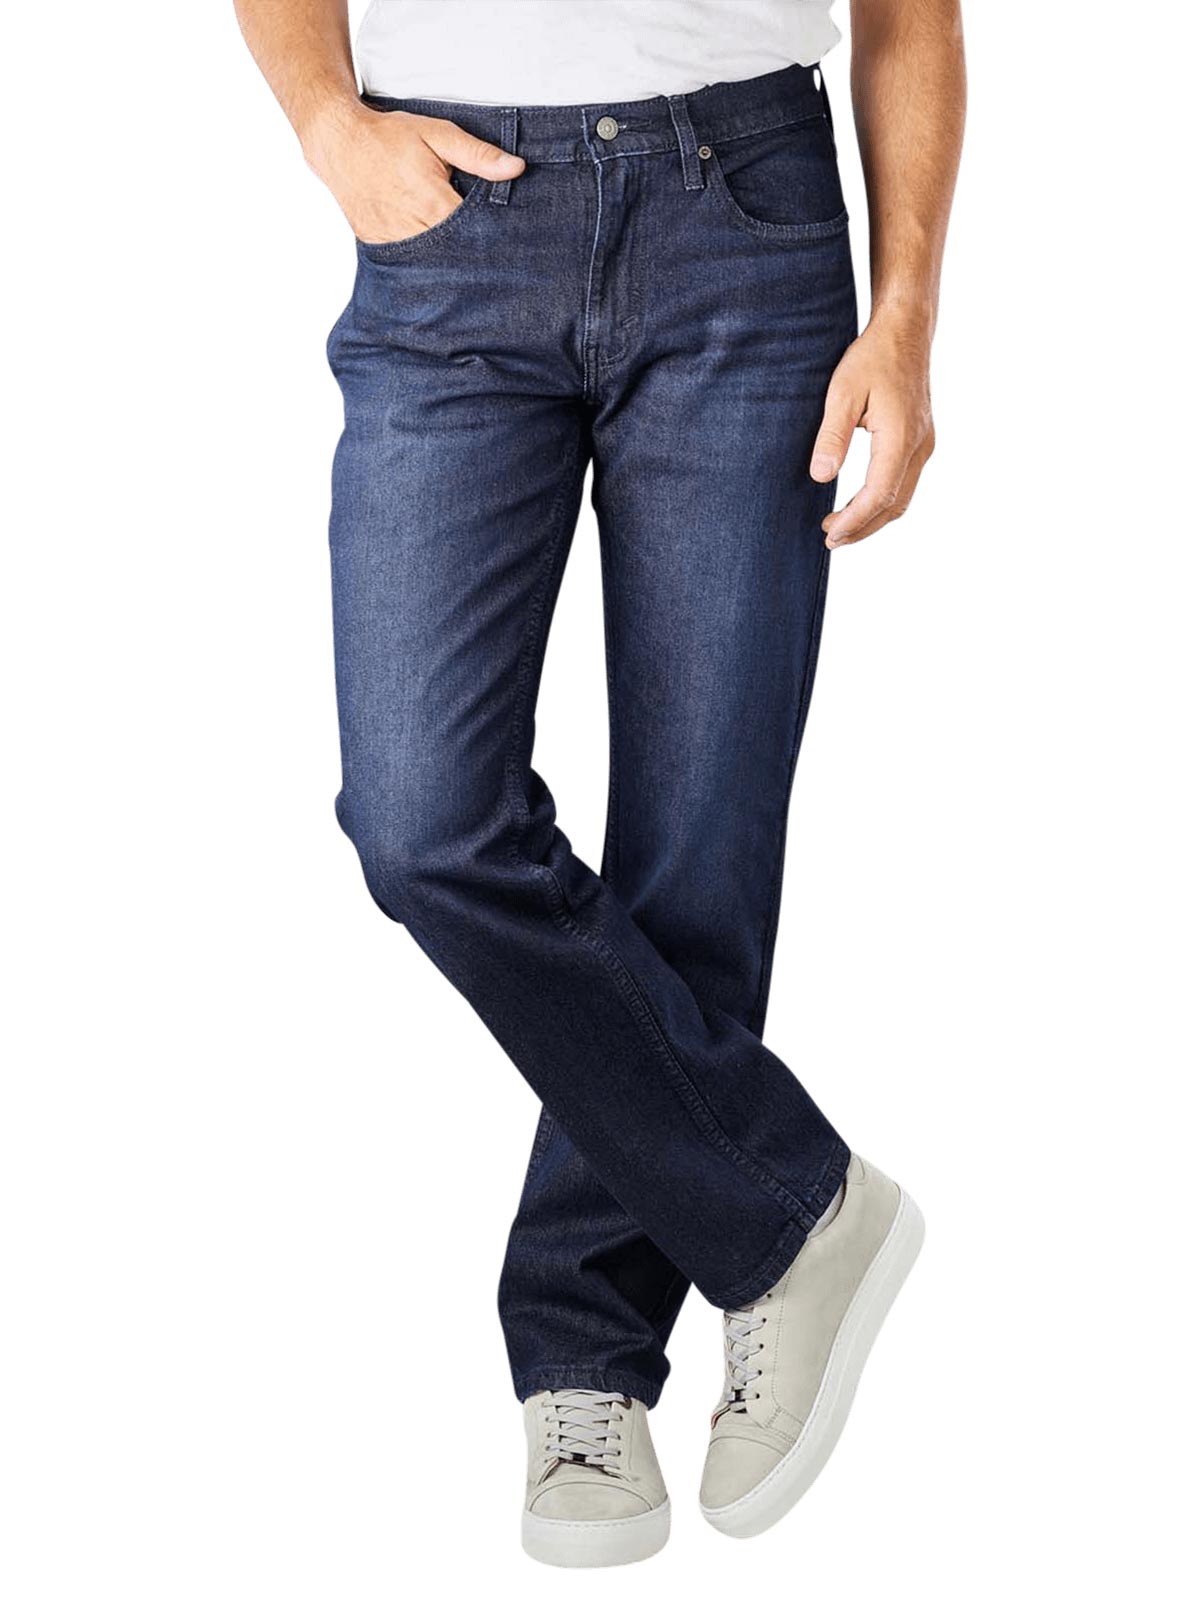 Levi's 514 Jeans Straight Fit myers crescent Levi's Men's Jeans | Free  Shipping on  - SIMPLY LOOK GOOD